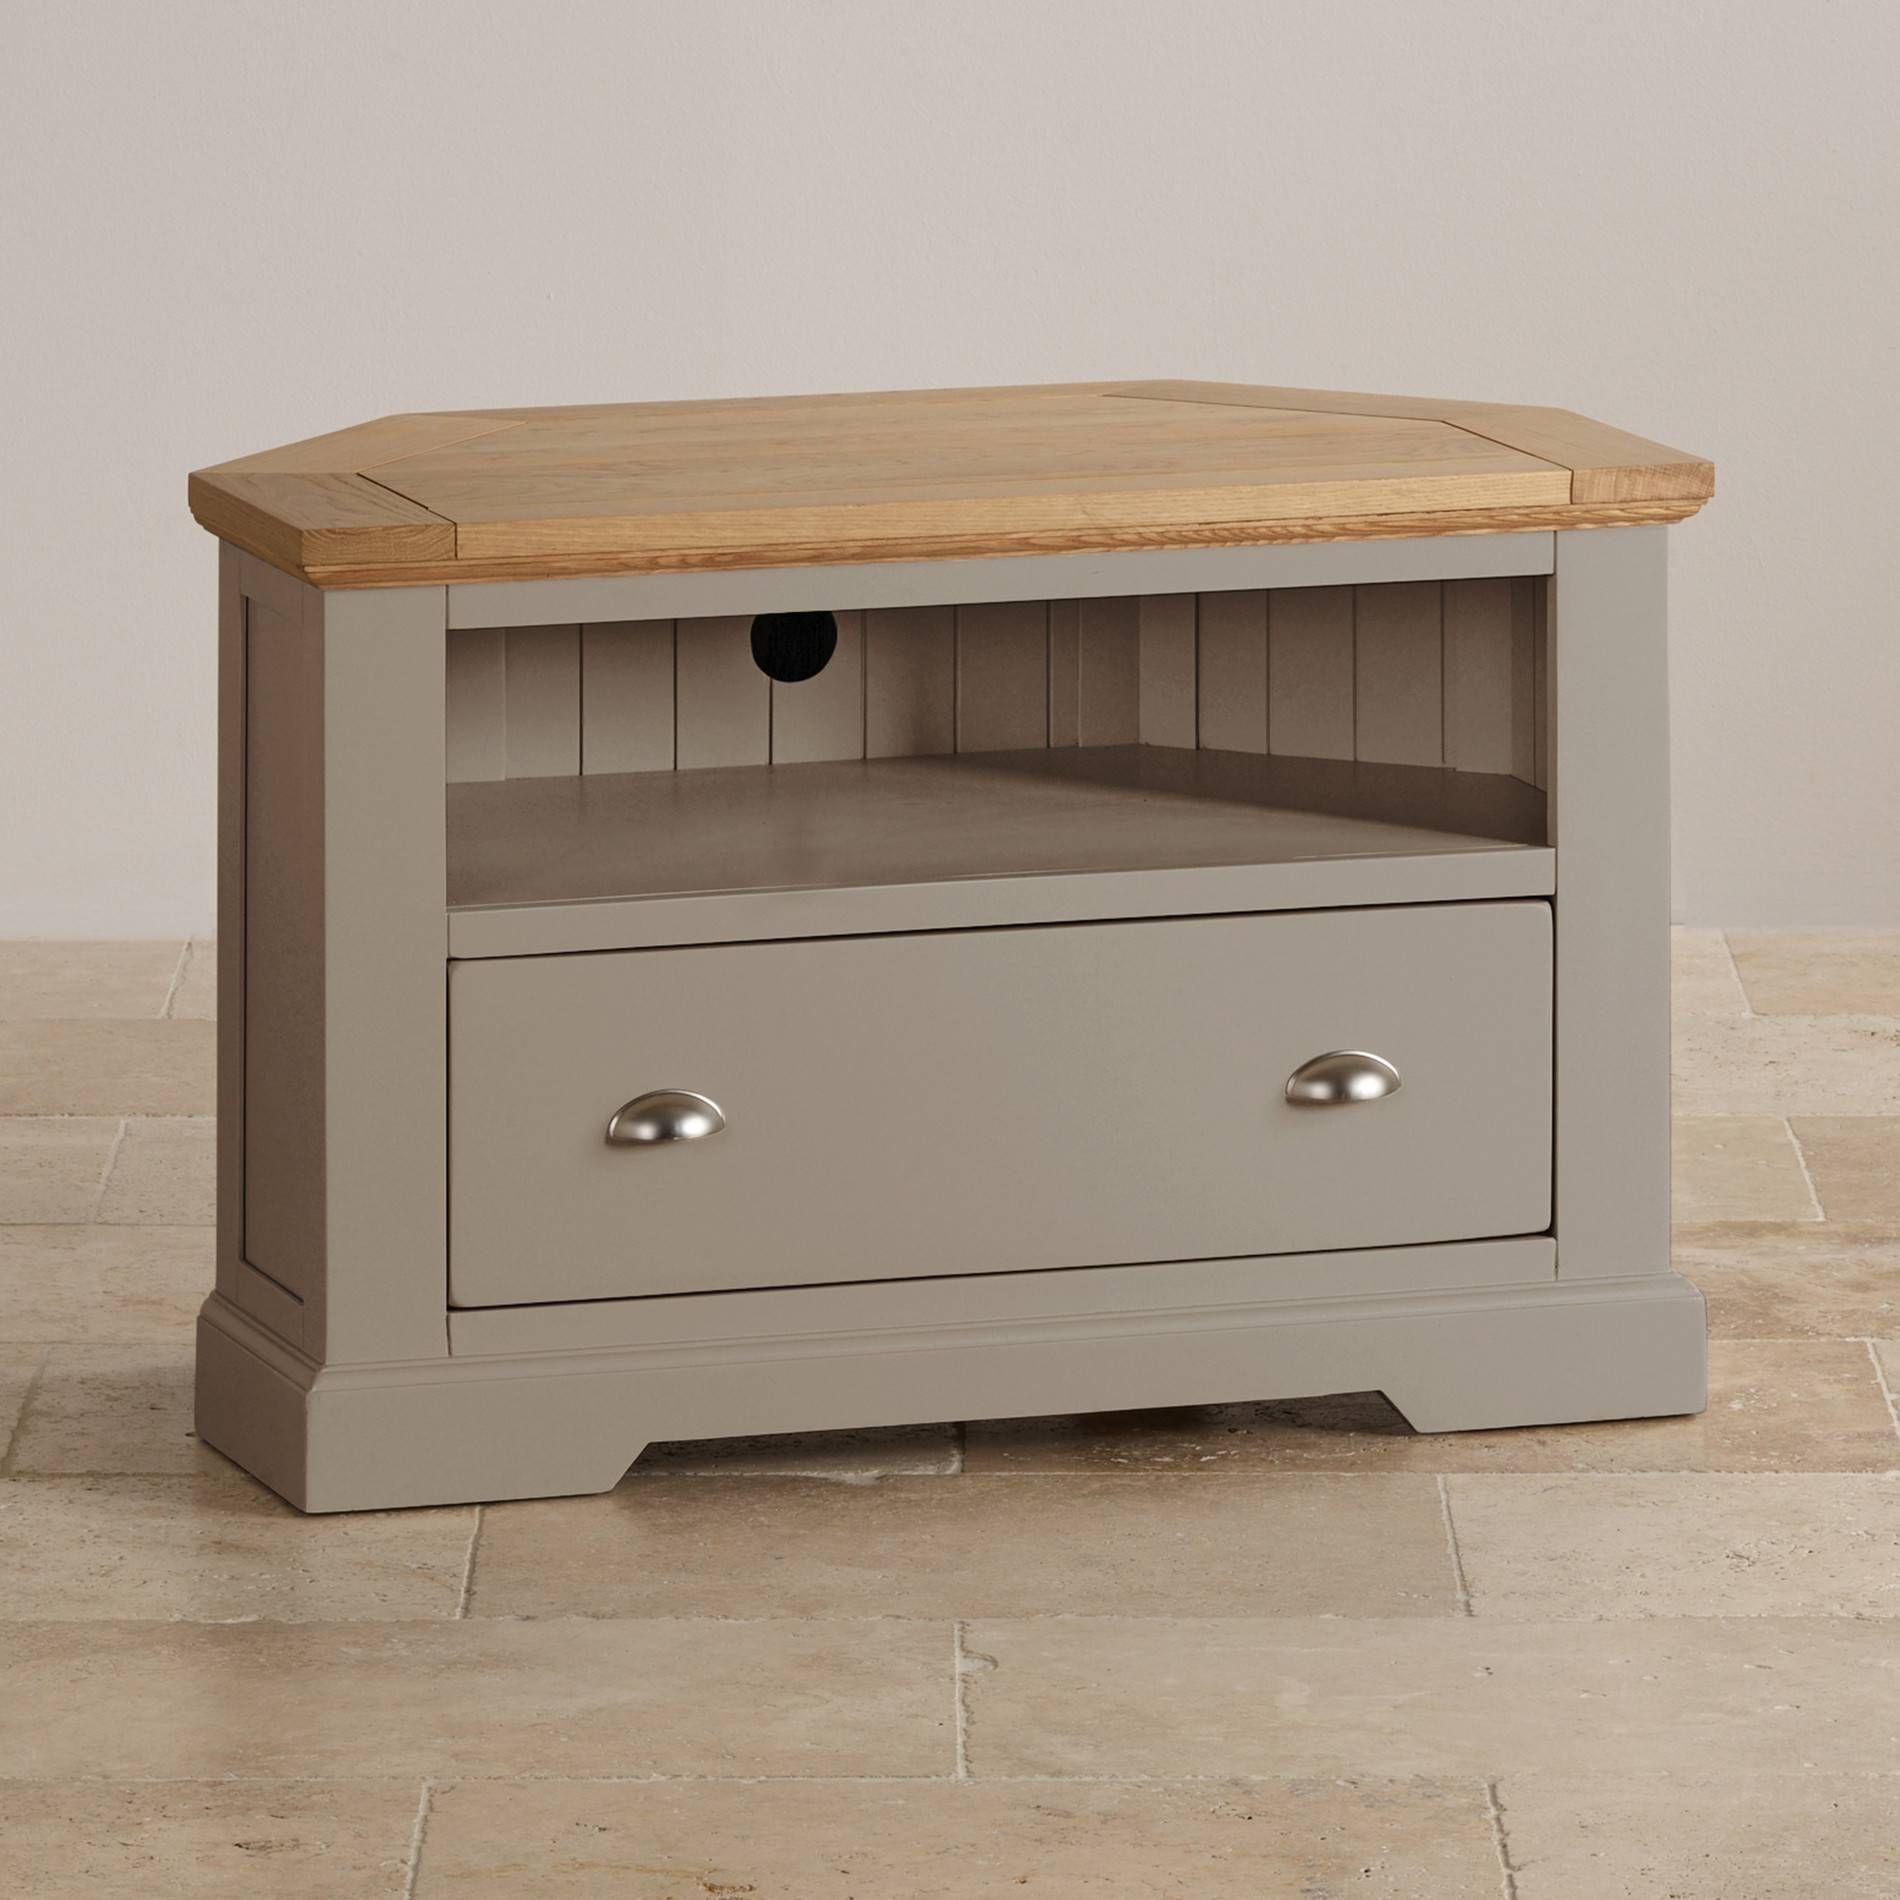 St Ives Corner Tv Unit In Grey Painted Acacia With Oak Top Intended For Tv Cabinets Corner Units (View 2 of 15)